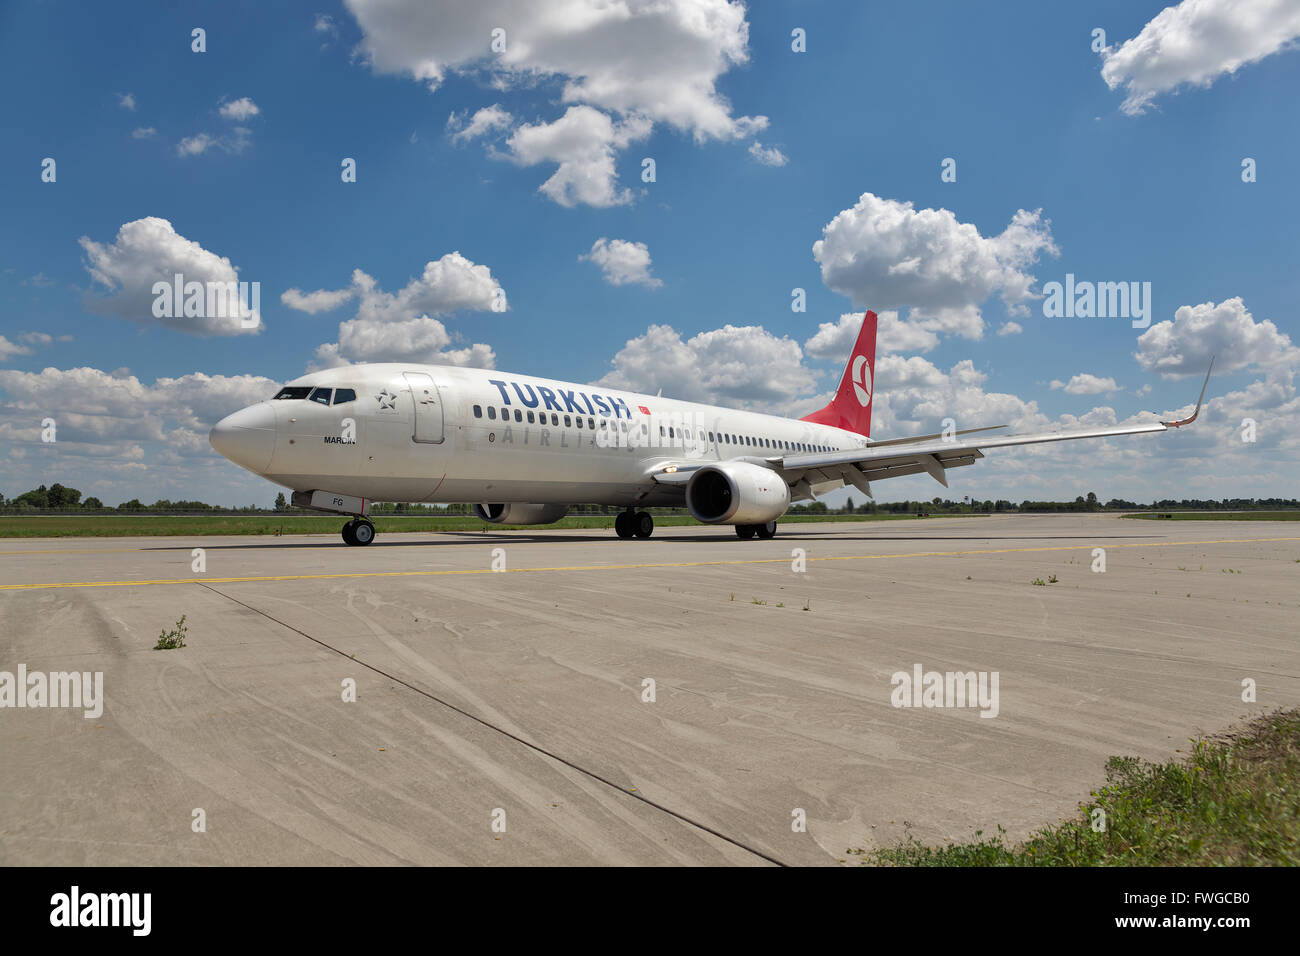 Borispol, Ukraine - July 5, 2014: Turkish Airlines Boeing 737 taxiing to the terminal after landing Stock Photo